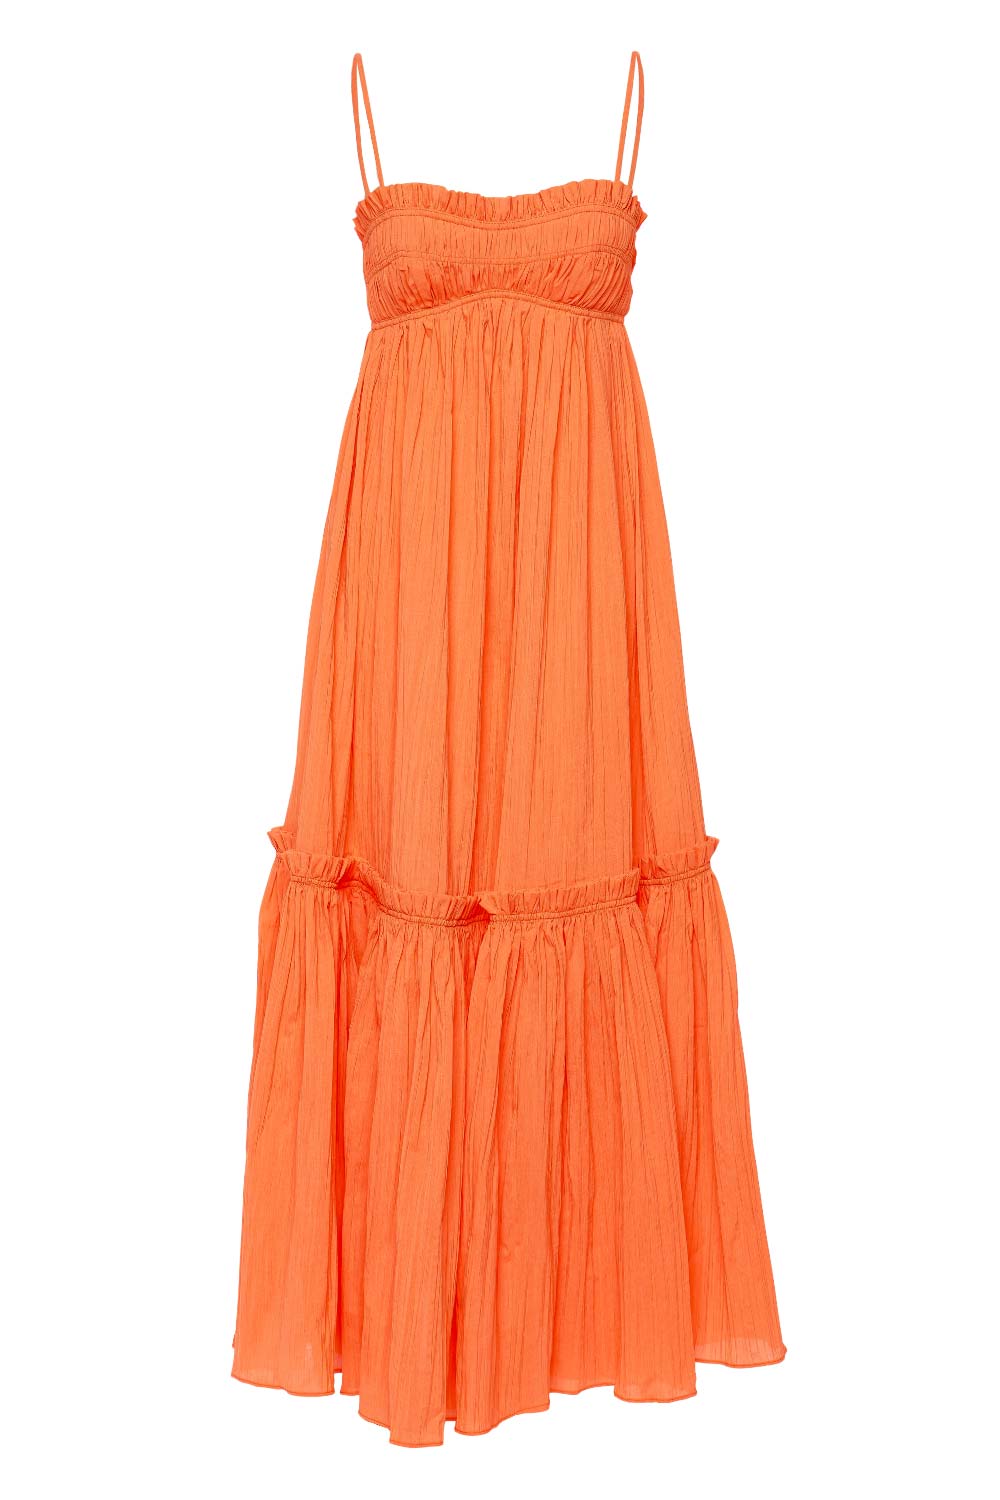 Acler Dartnell Apricot Tiered Maxi Dress